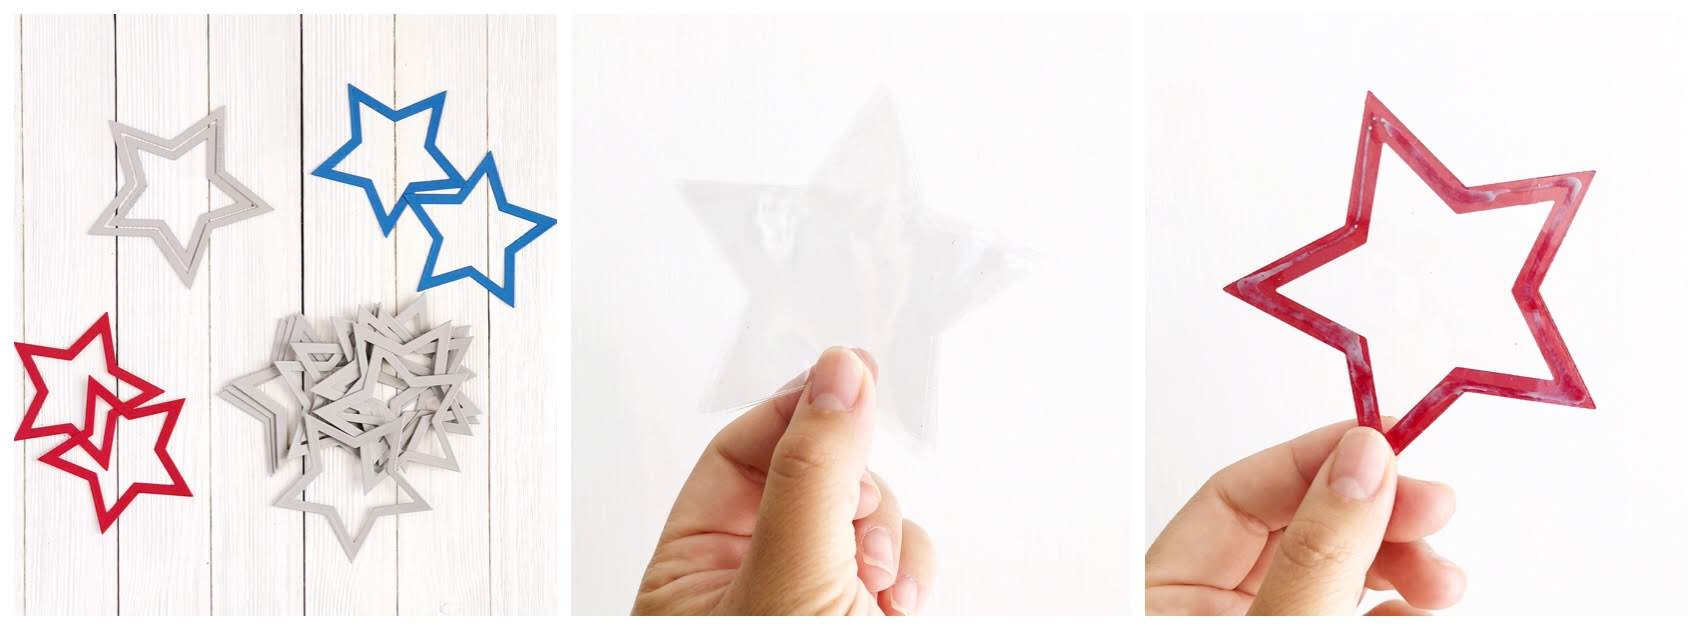 DIY Paper Stars for Fourth of July